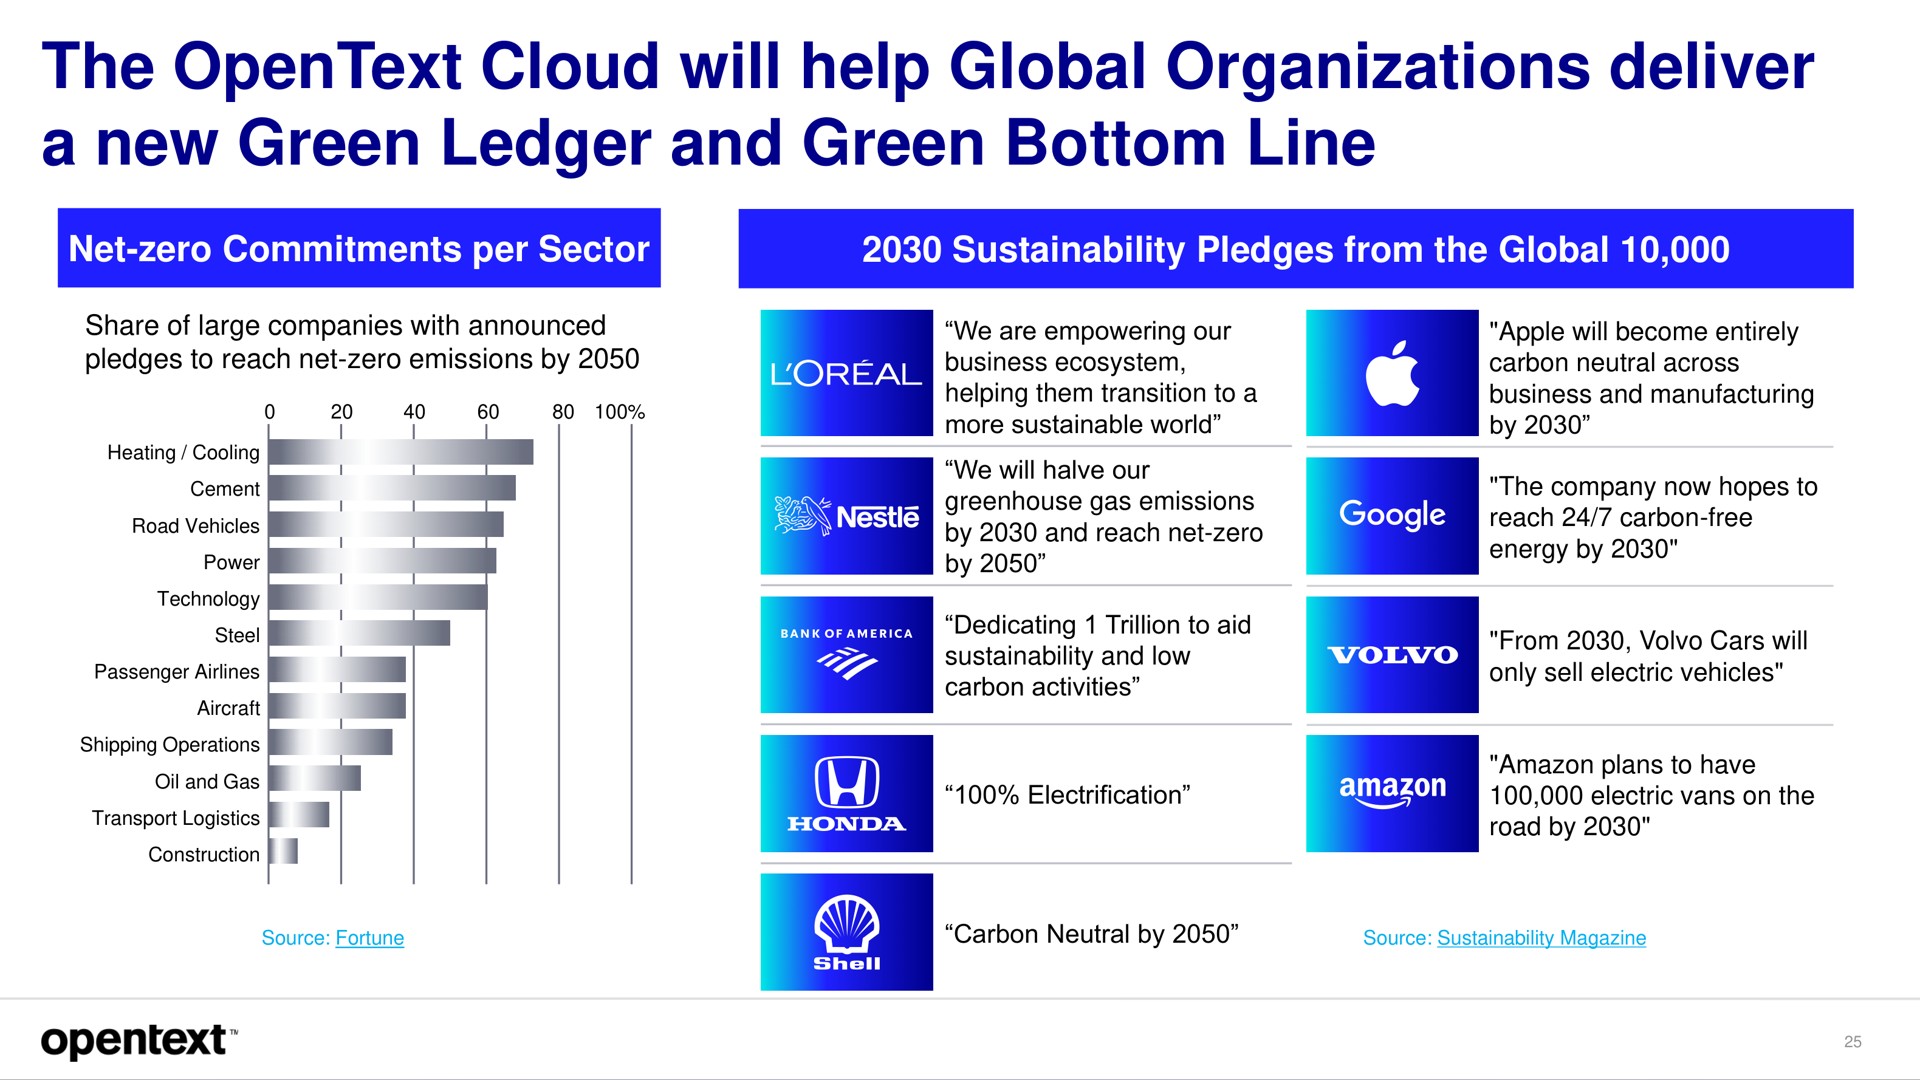 the cloud will help global organizations deliver a new green ledger and green bottom line | OpenText